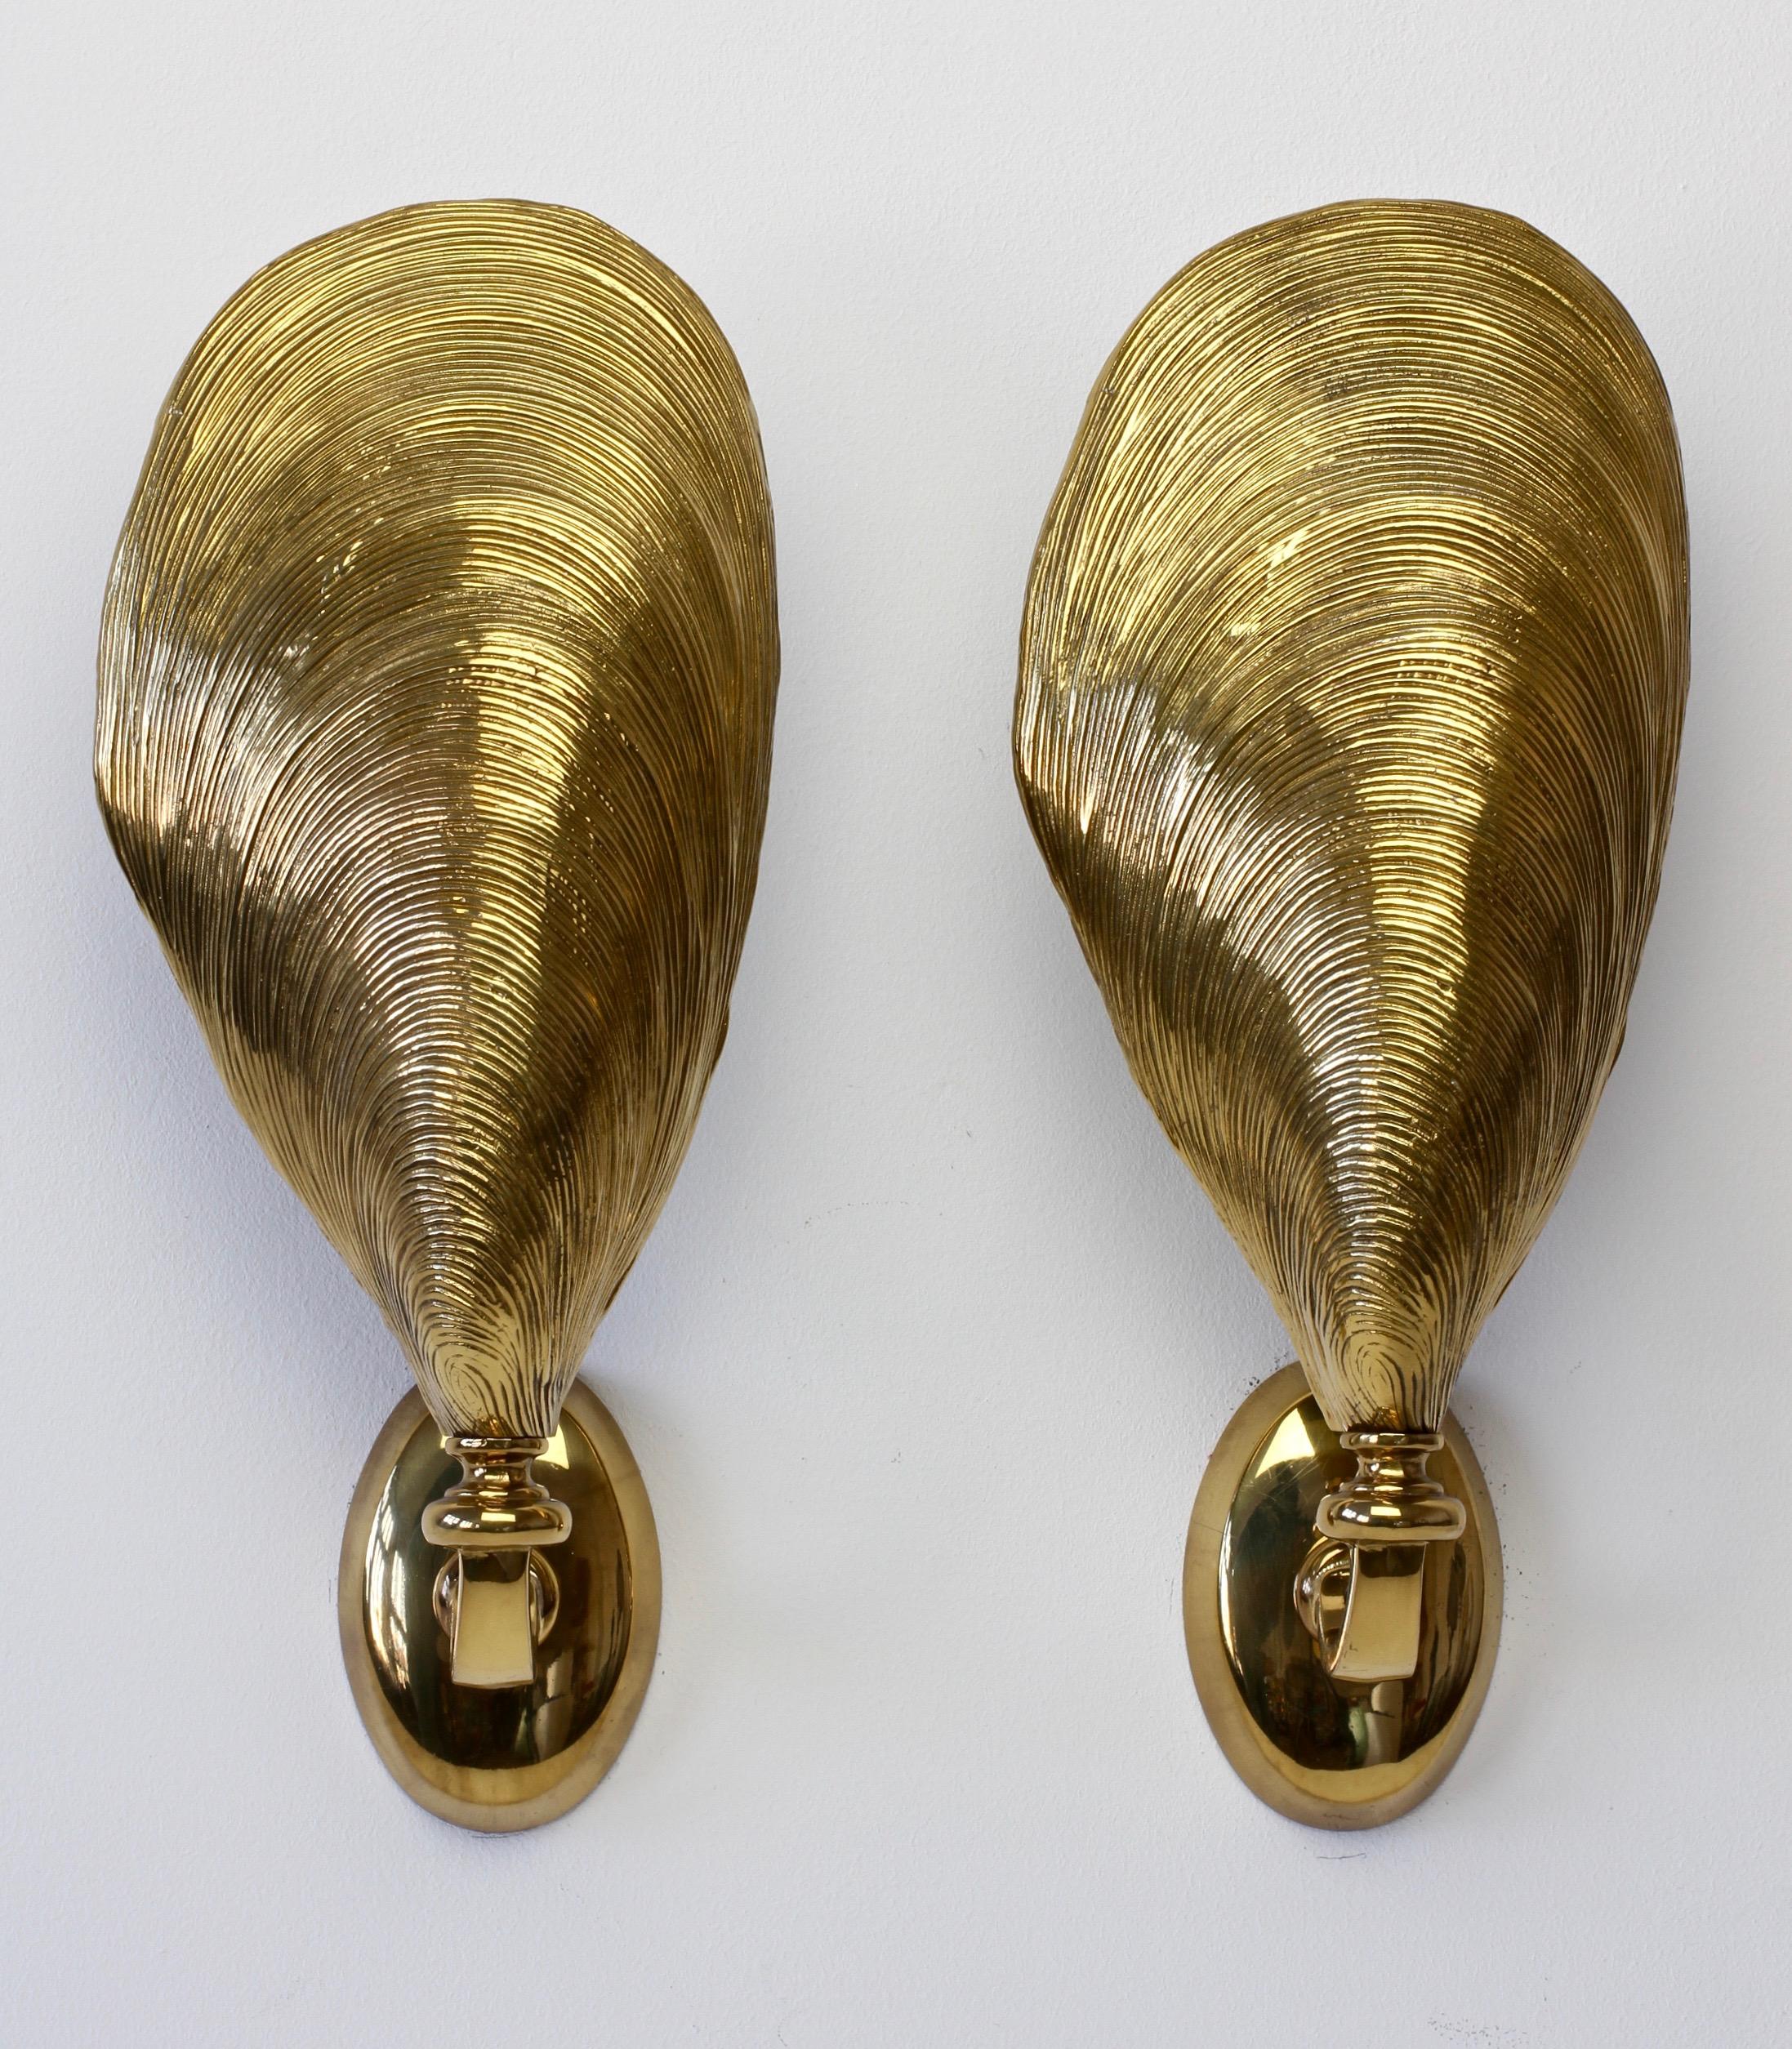 An absolutely stunning pair of midcentury wall-mounted sconces attributed to Maison Jansen, France, circa 1970s. In the shape of mussel shells and made of cast bronze, these are not dissimilar to lights made by Maison Charles - however, we believe